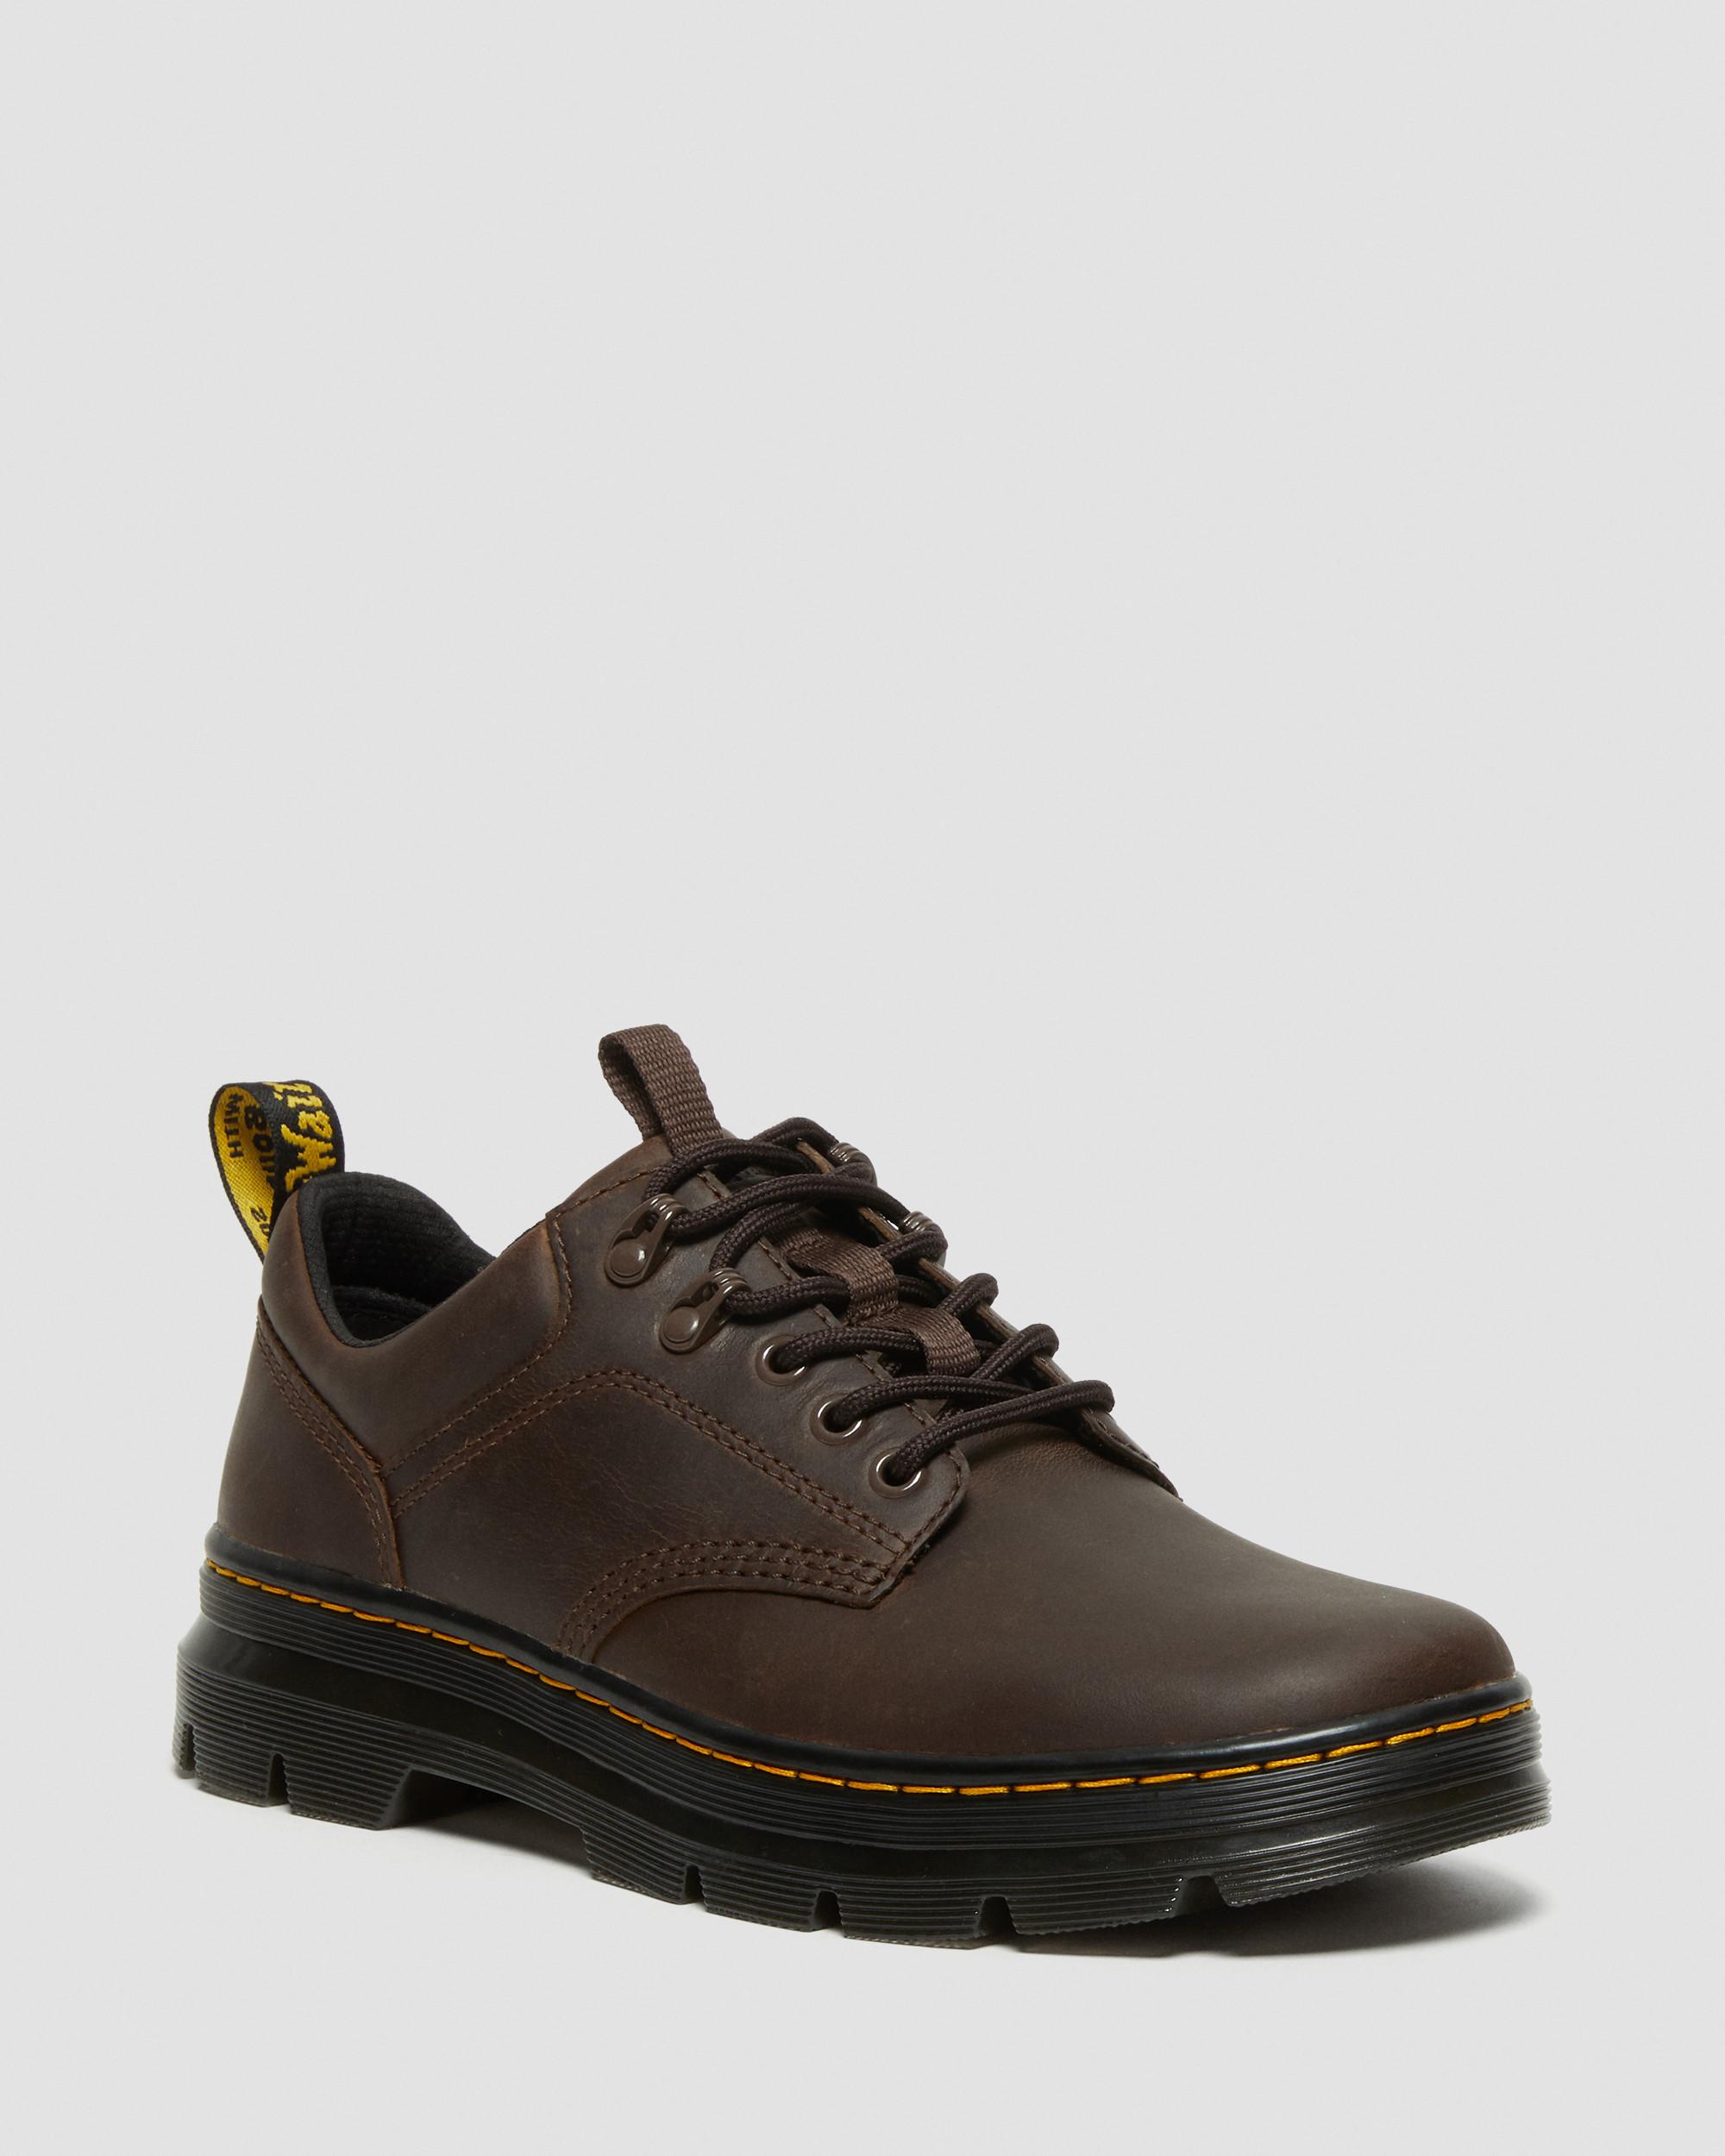 Reeder Crazy Horse Leather Utility Shoes in Dark Brown | Dr. Martens